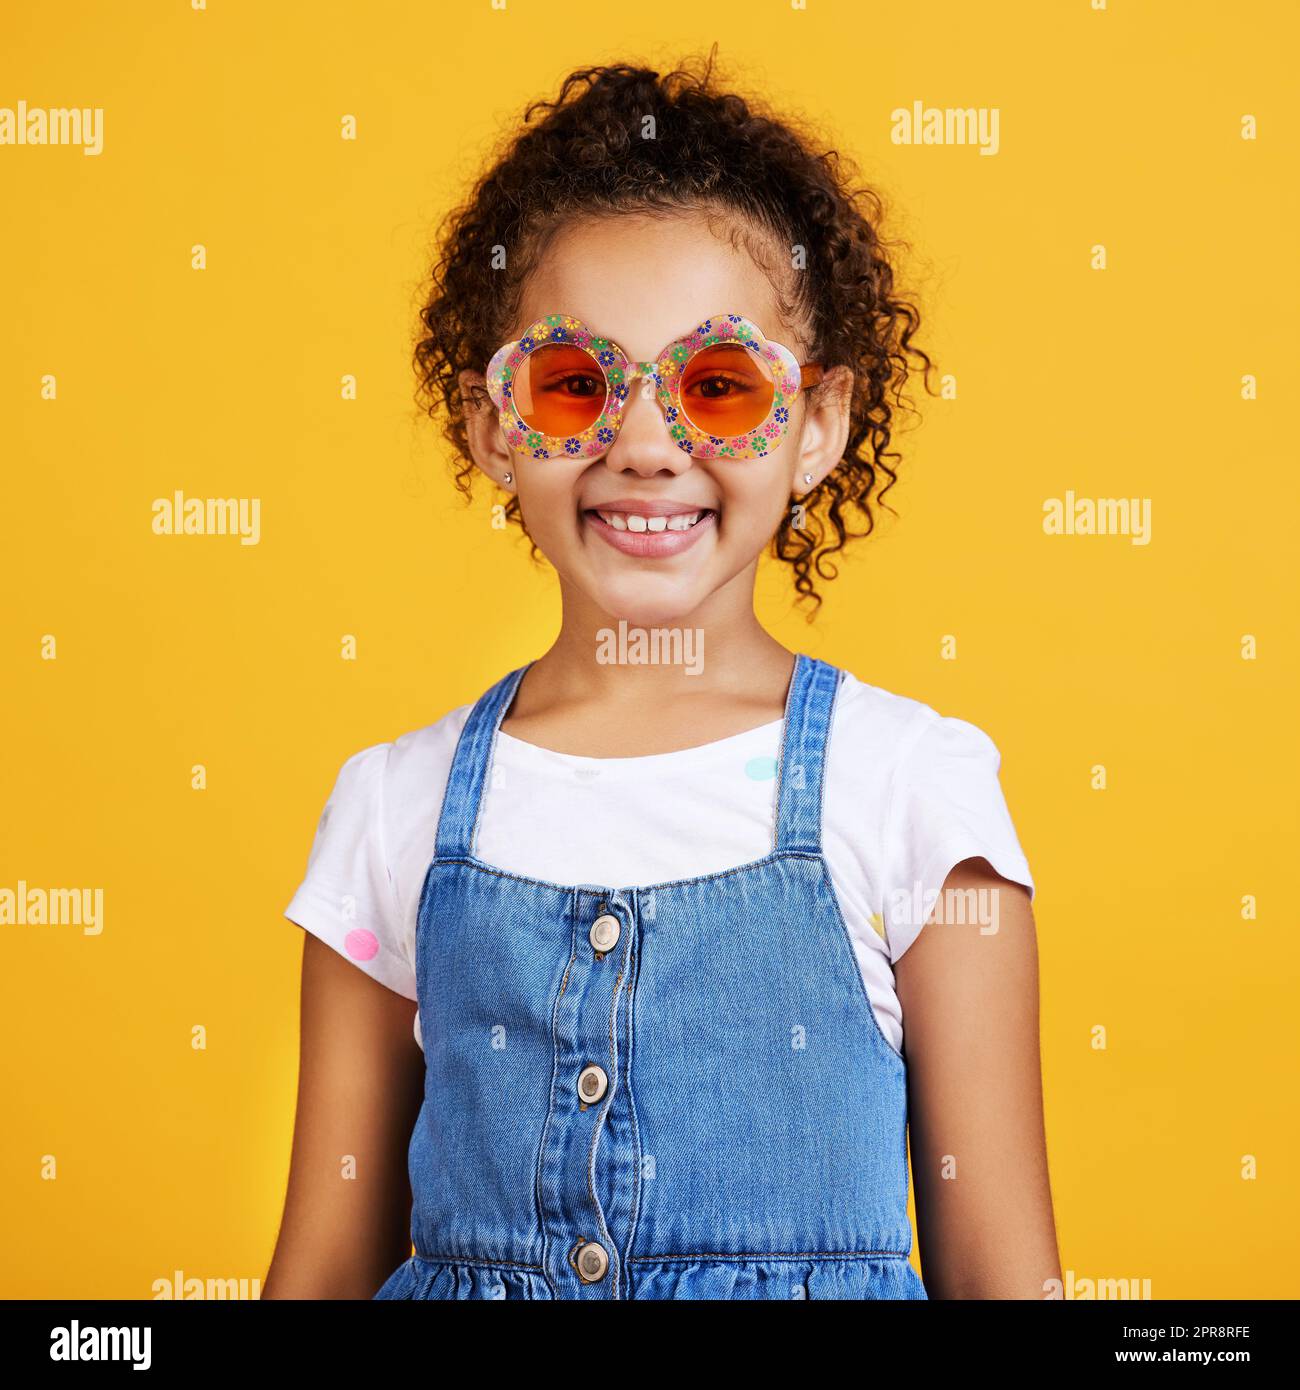 Studio portrait mixed race girl wearing funky sunglasses Isolated against a yellow background. Cute hispanic child posing inside. Happy and carefree kid with an imagination for being a fashion model Stock Photo